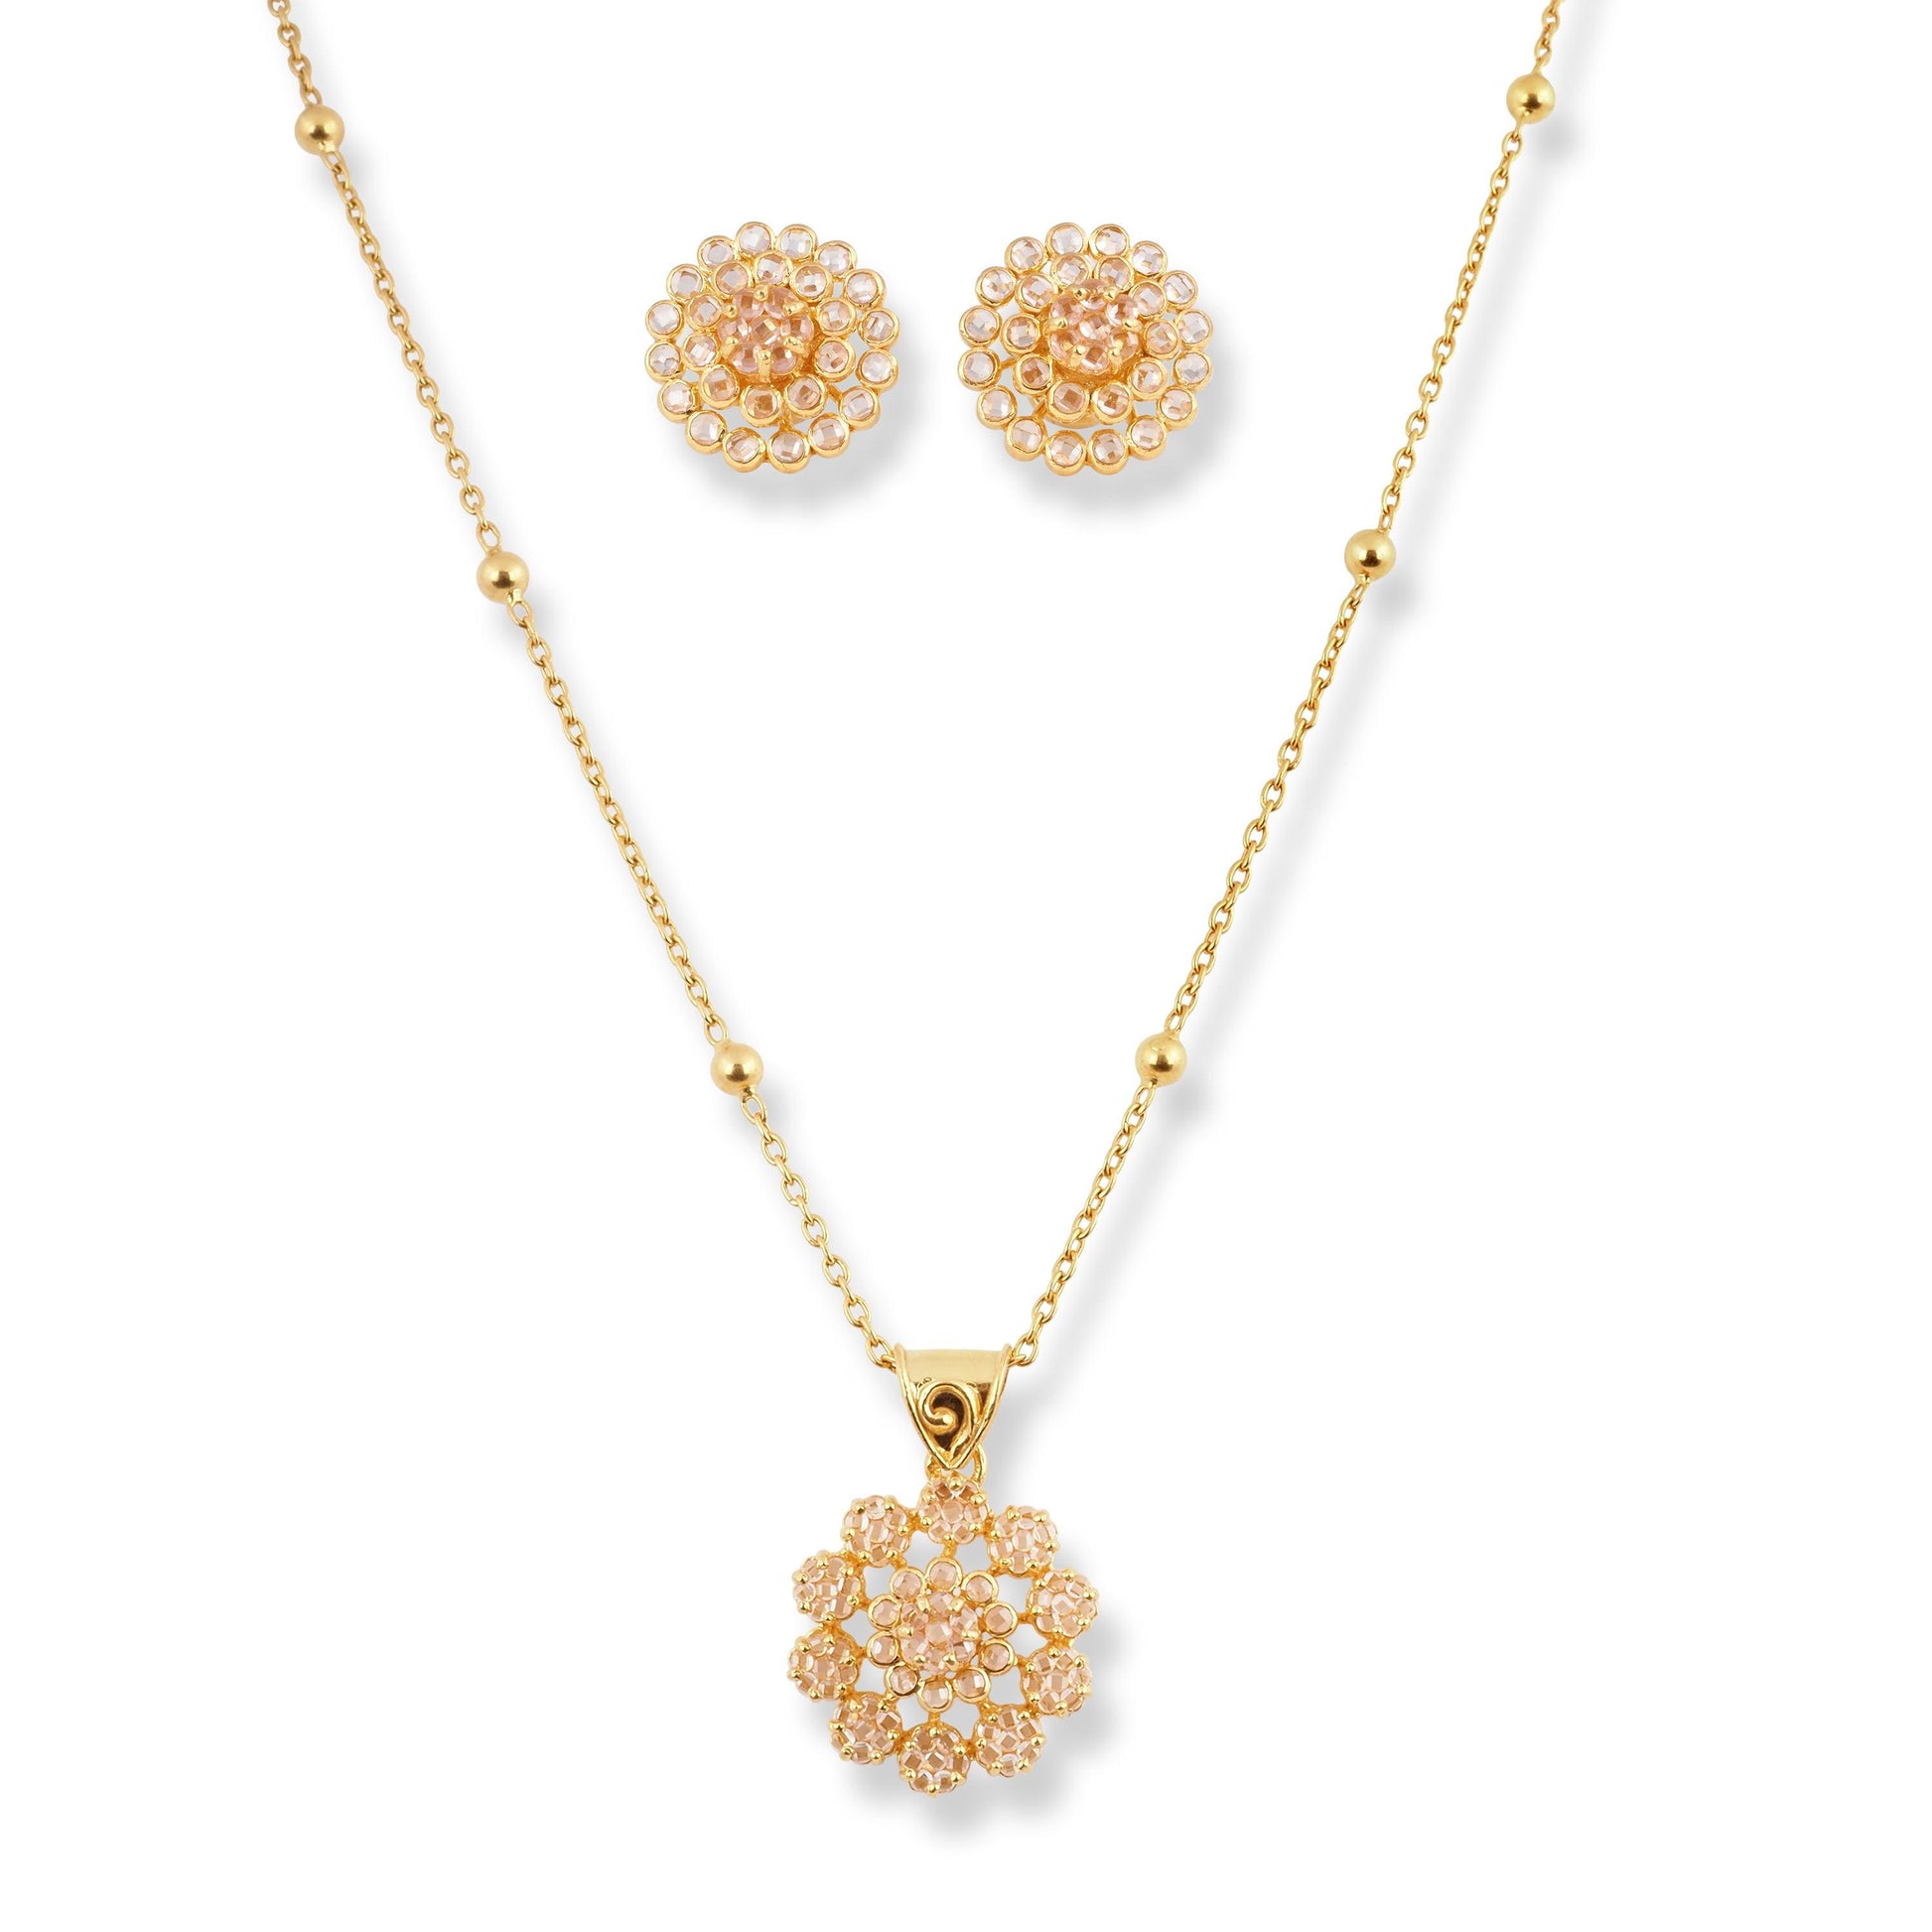 22ct Yellow Gold Necklace & Earring Suite with Polki Style Cubic Zirconia Stones - Minar Jewellers